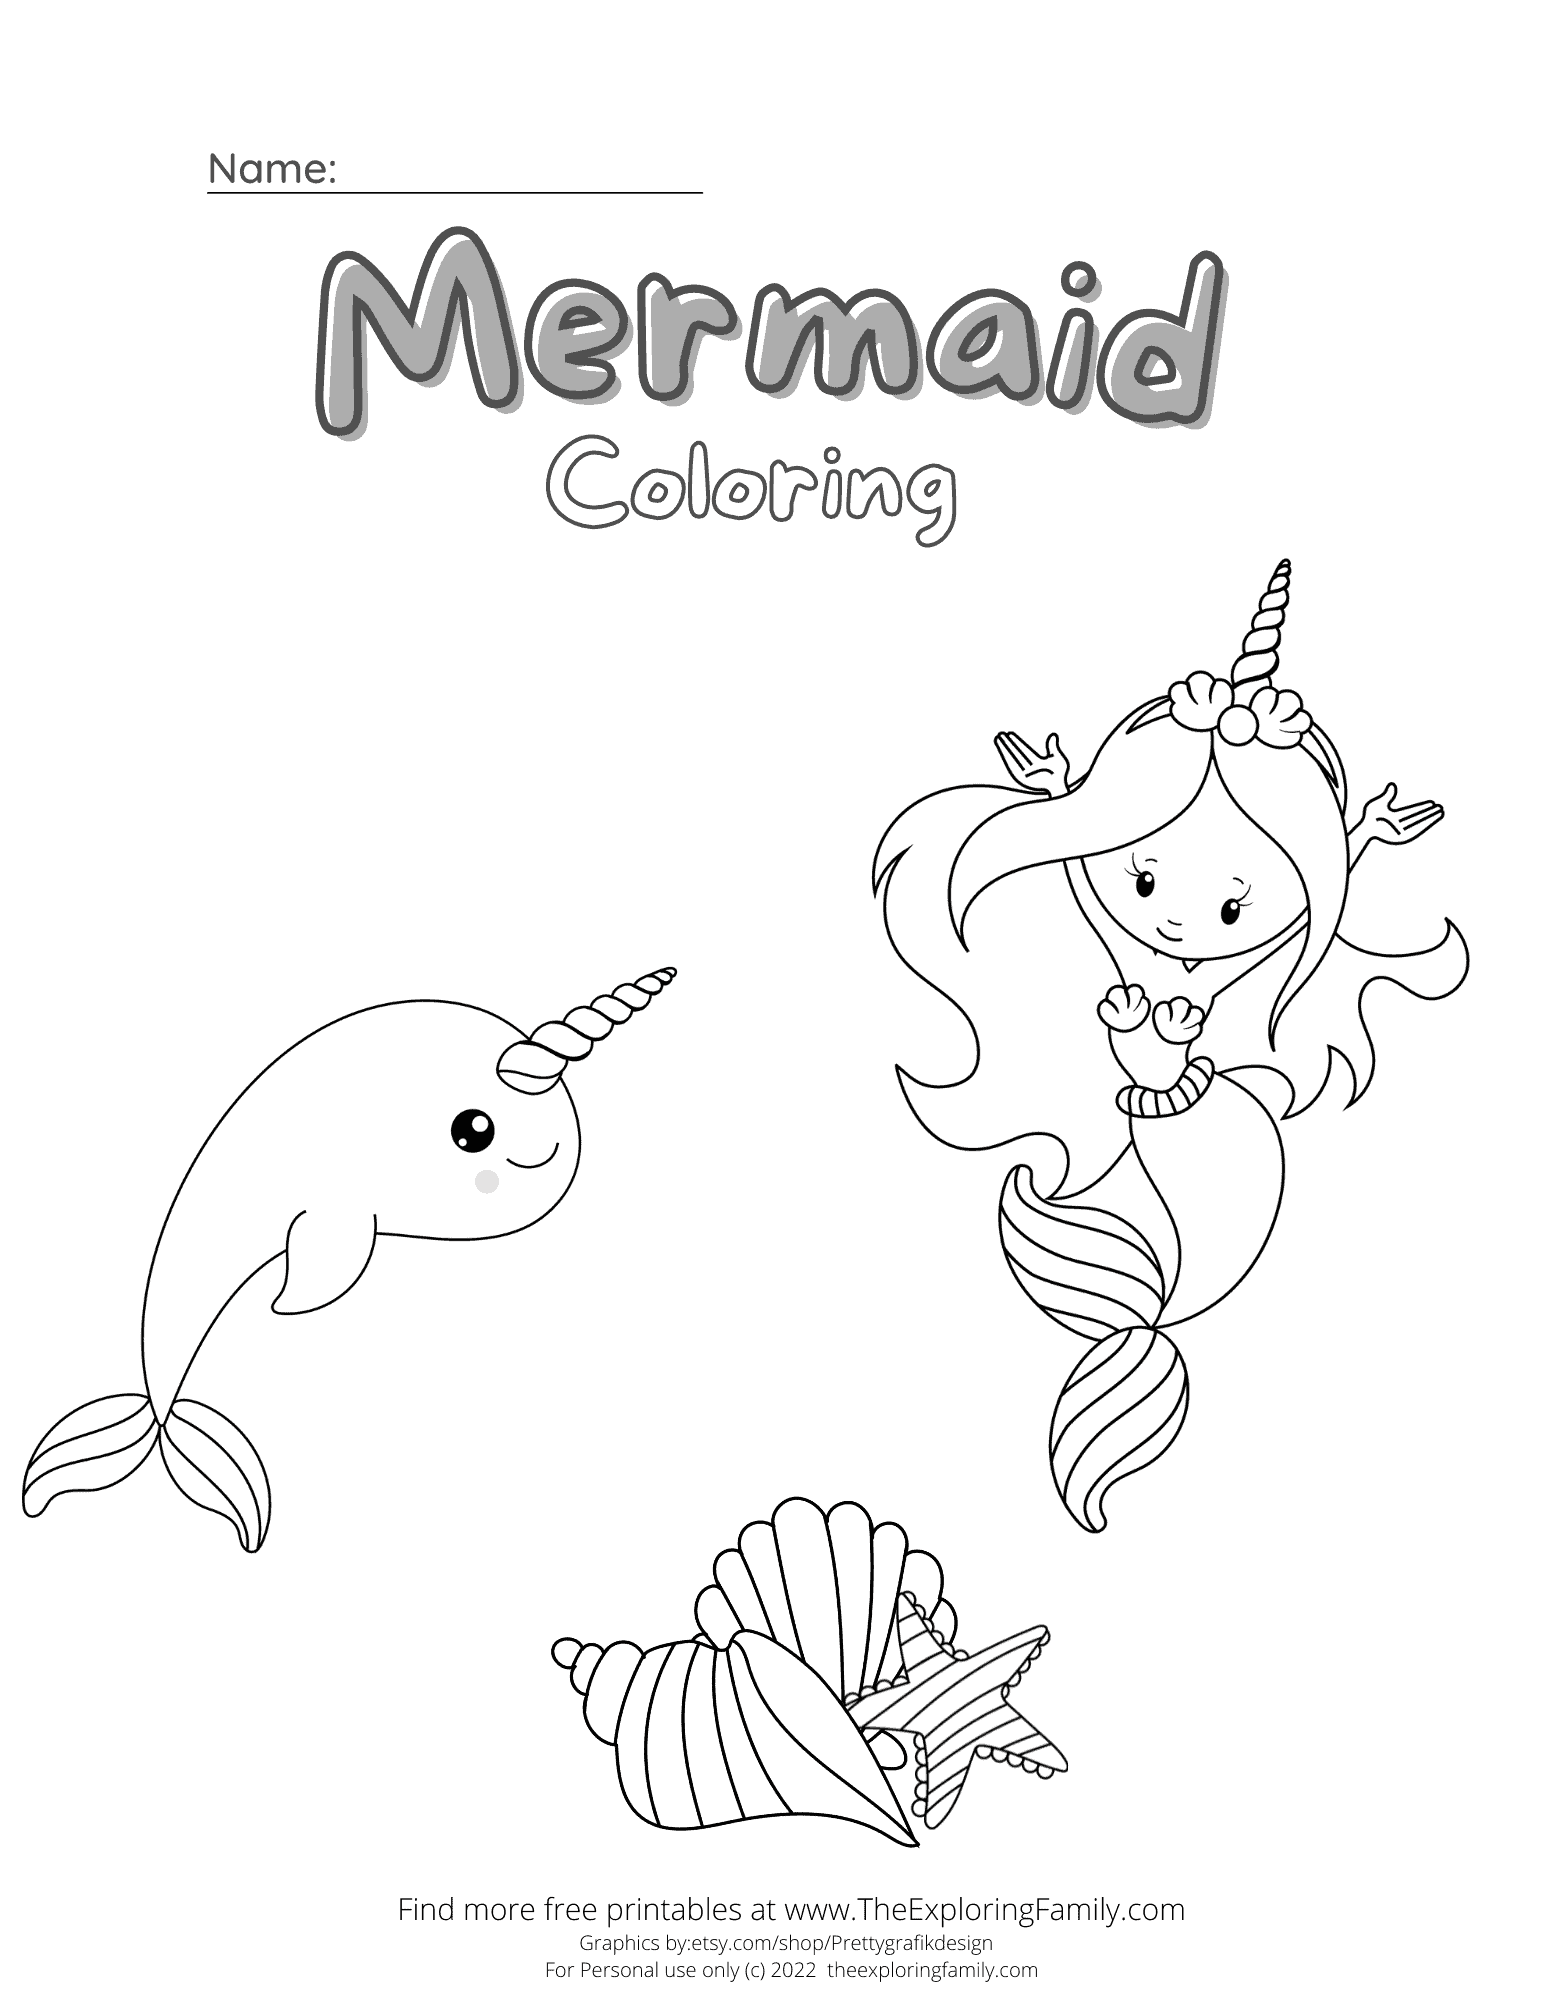 Mermaid Coloring and Activity Sheets, preschool edition, 20 pages, digital  download, coloring sheets, maze, word search and tracing